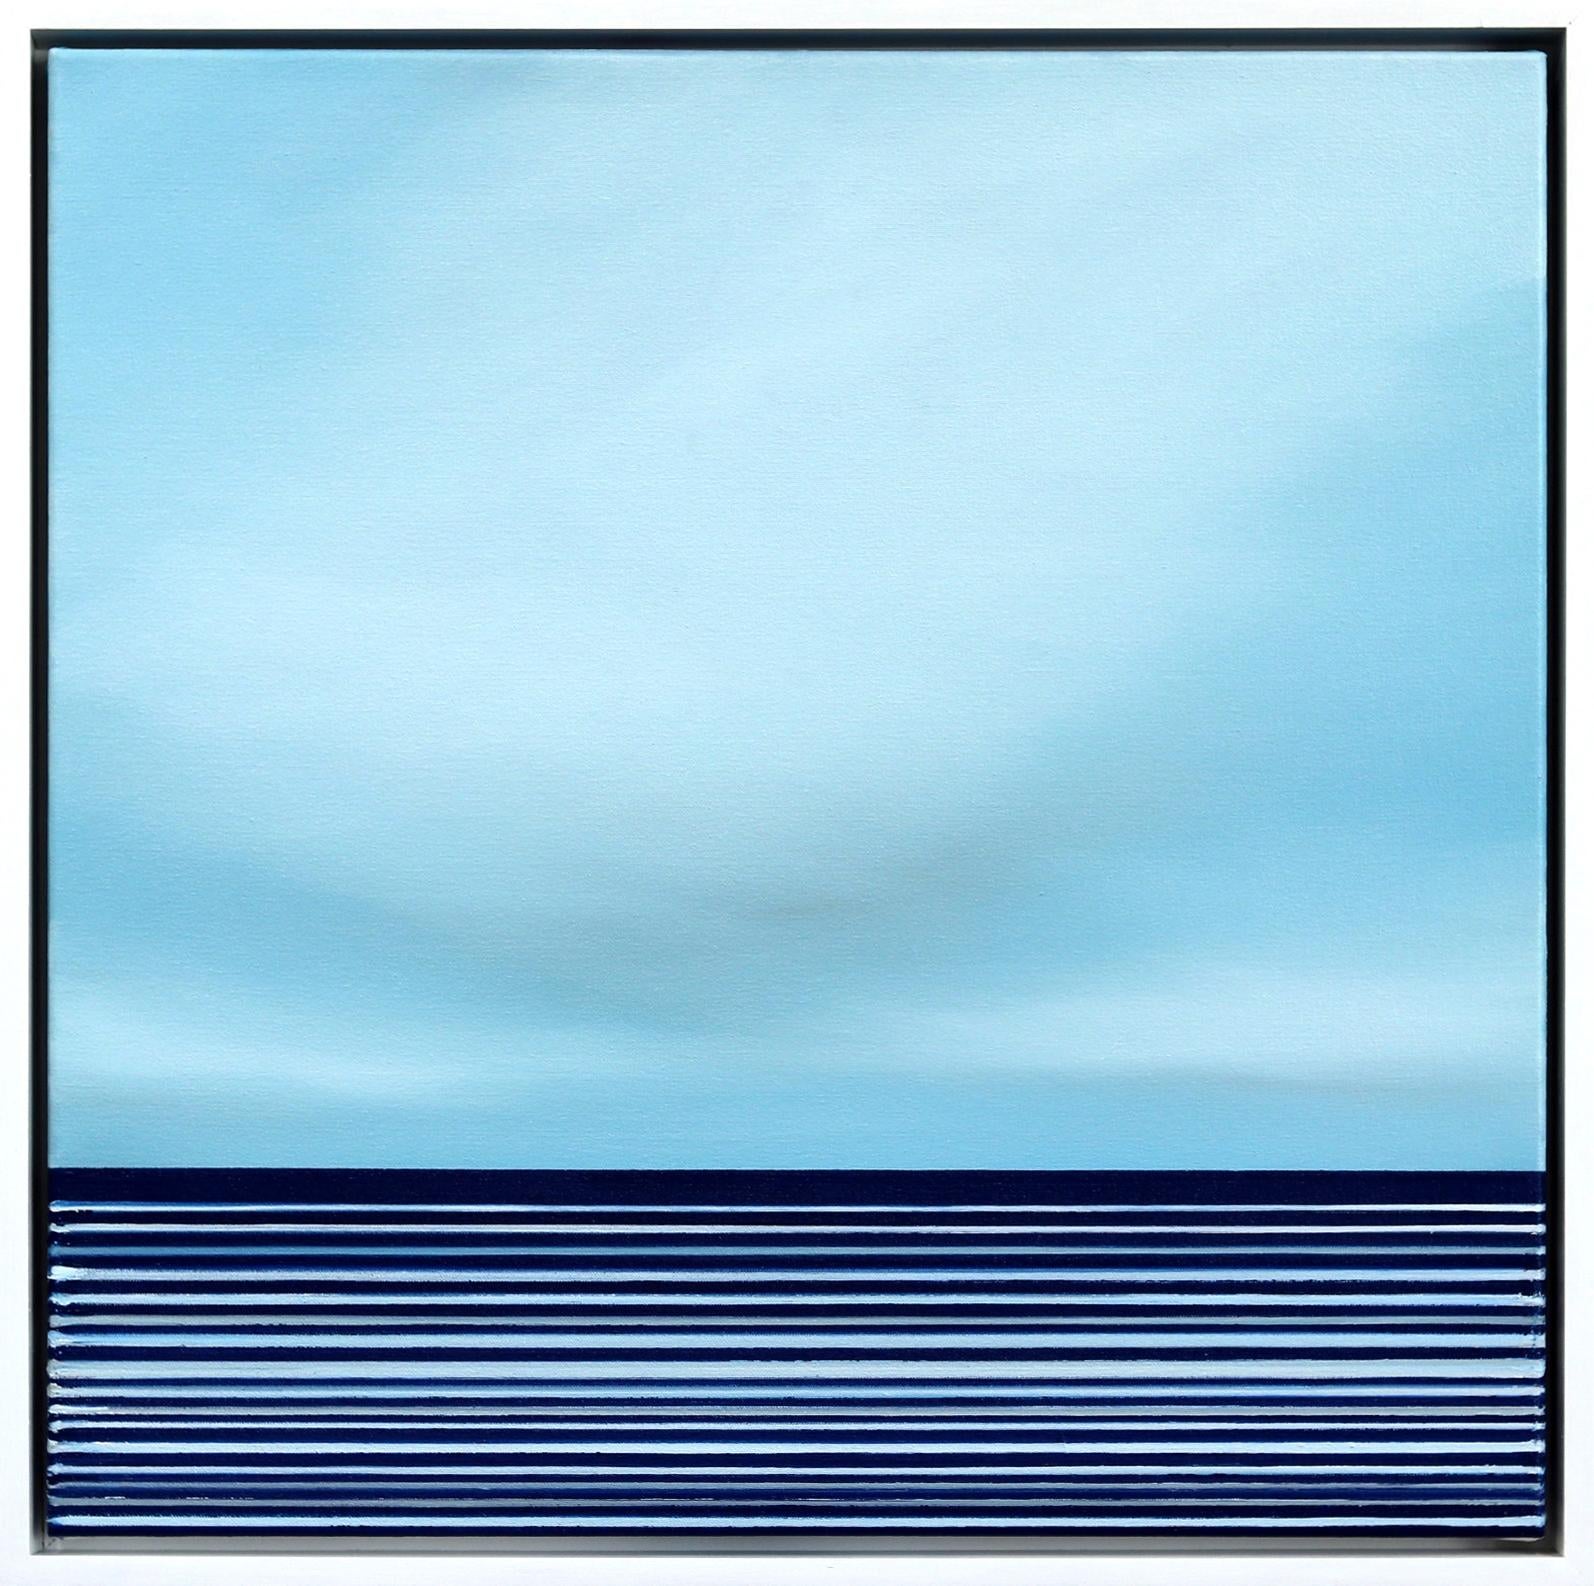 Jeremy  Prim Abstract Painting - "Untitled No. 768" - Framed Contemporary Minimalist Blue Artwork